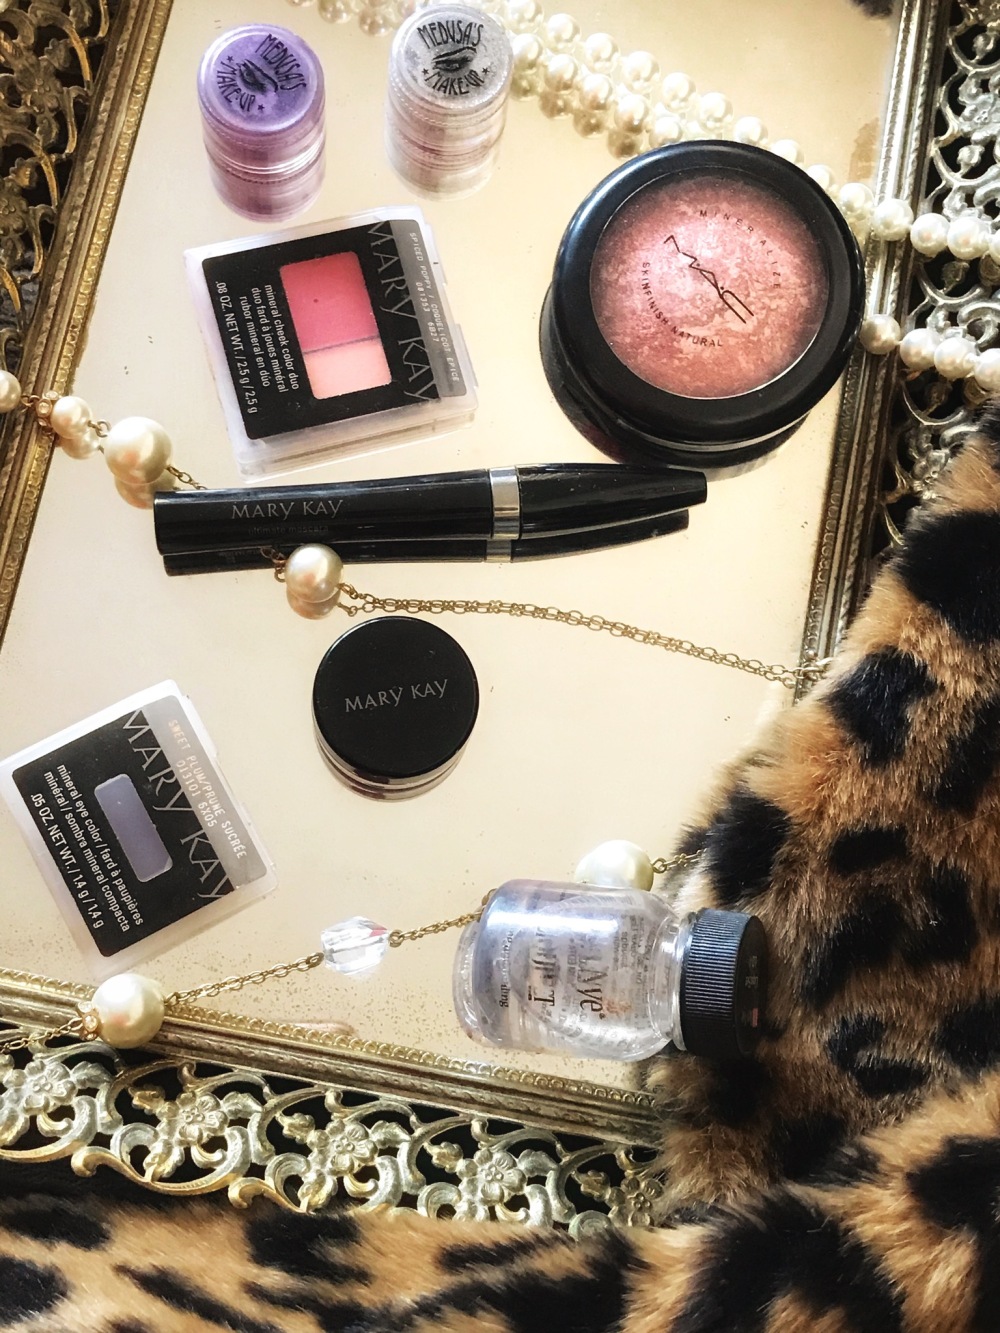 http://finessecurves.com, beauty blogger, holiday makeup, mary kay, saint louis blogger, stl, top blogger, top influencer, midwest blogger, southern blogger, dove, covergirl, nars, coulor pop, sephora, fenty beauty, black girls rock, essence